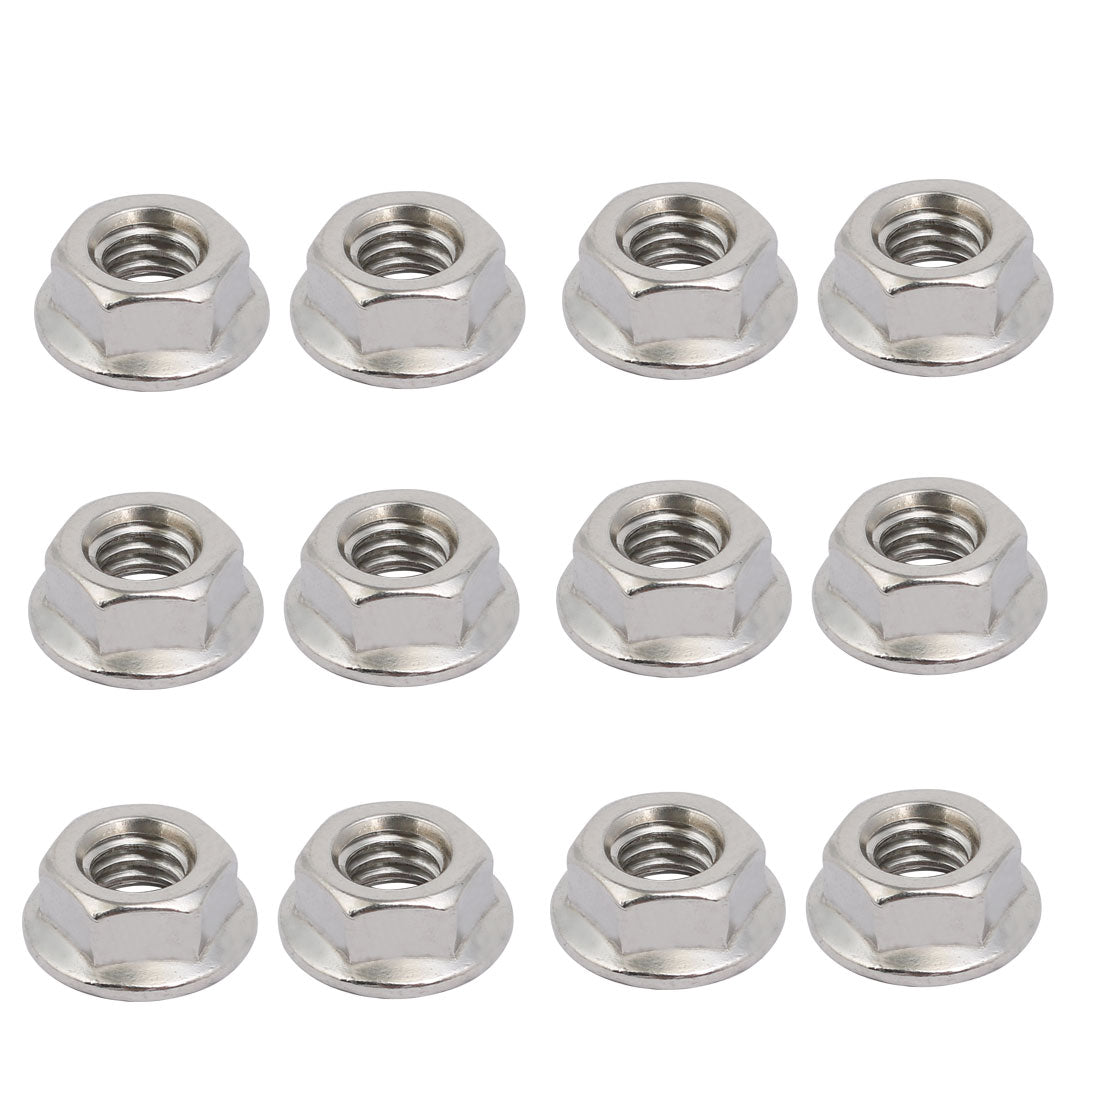 uxcell Uxcell 12pcs 5/16"-18 UNC Thread 304 Stainless Steel Hex Serrated Flange Nut Fastener